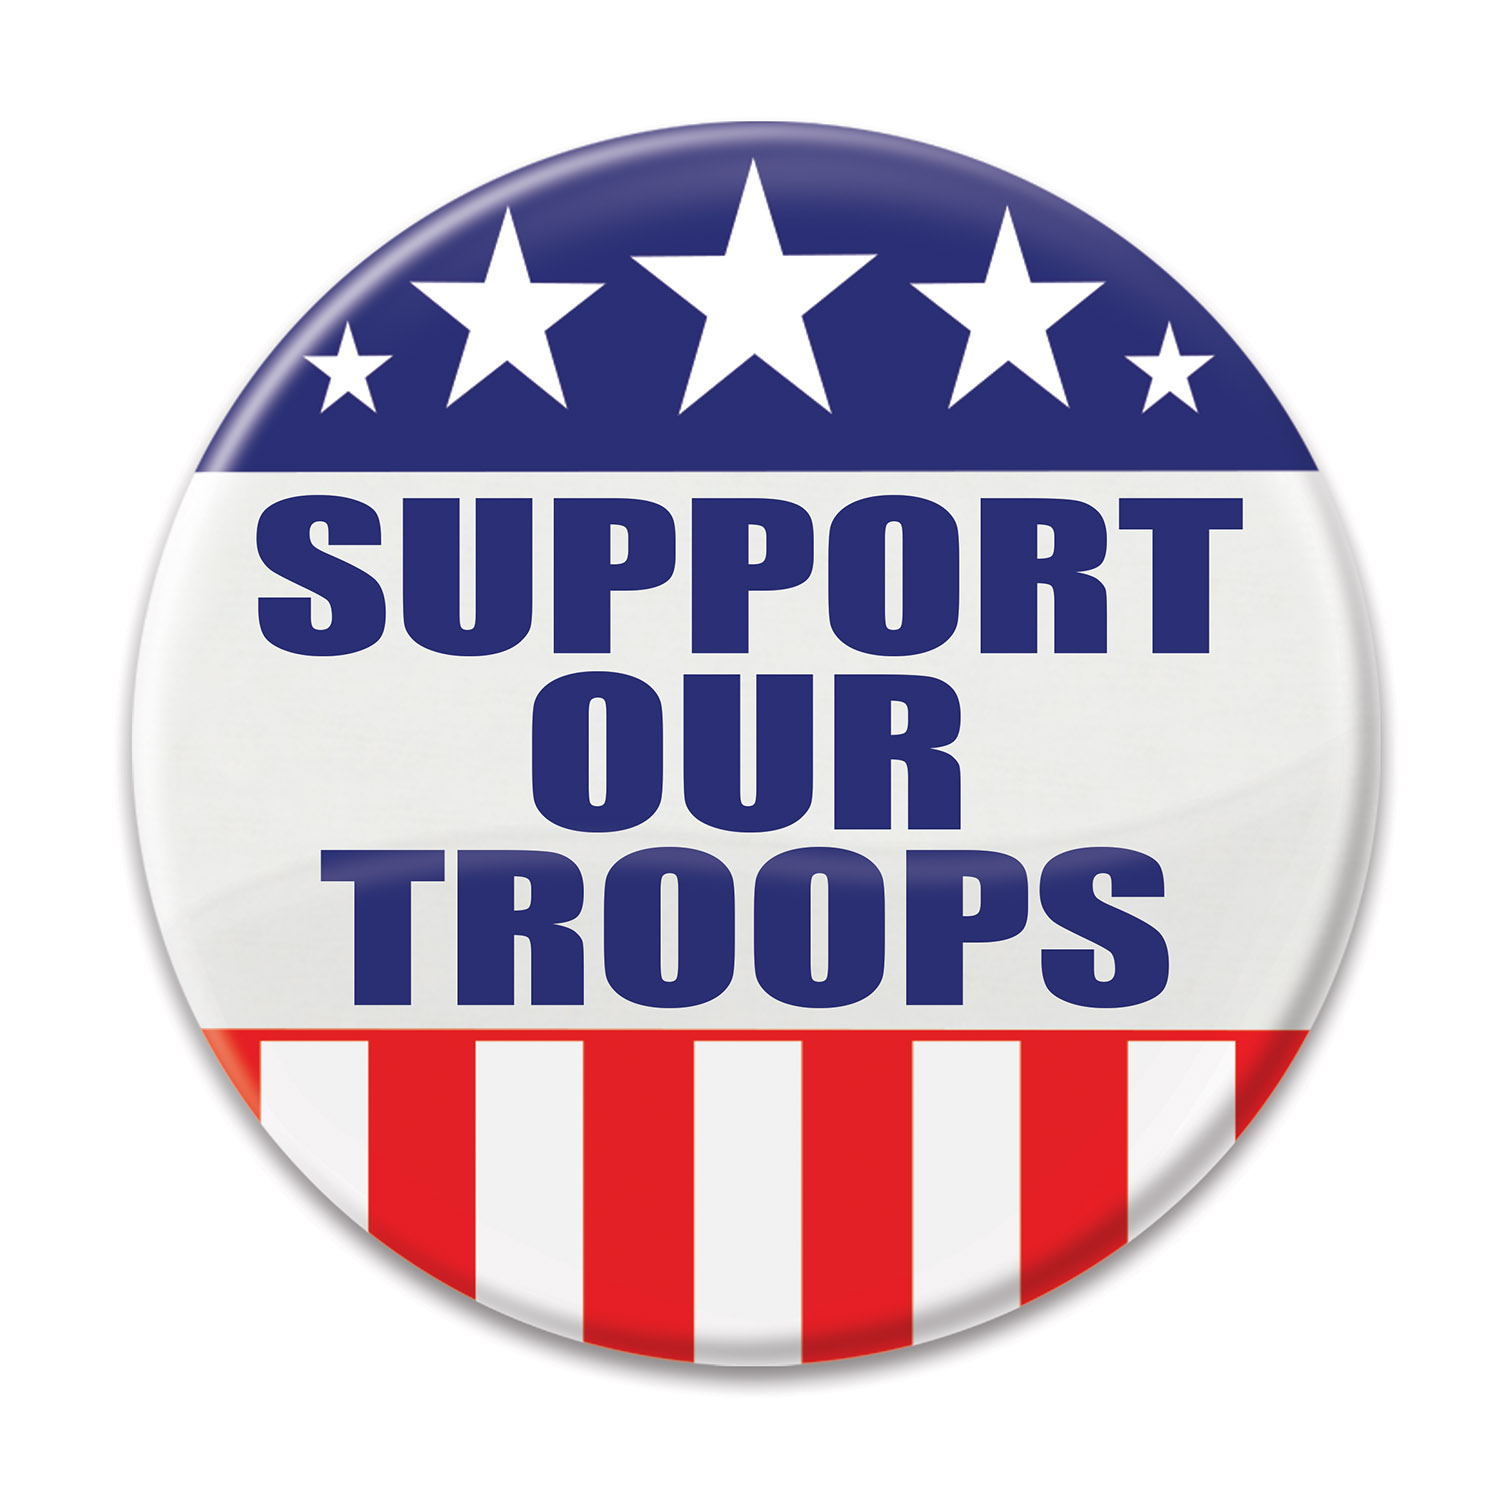 SUPPORT OUR TROOPS BUTTON (6) image